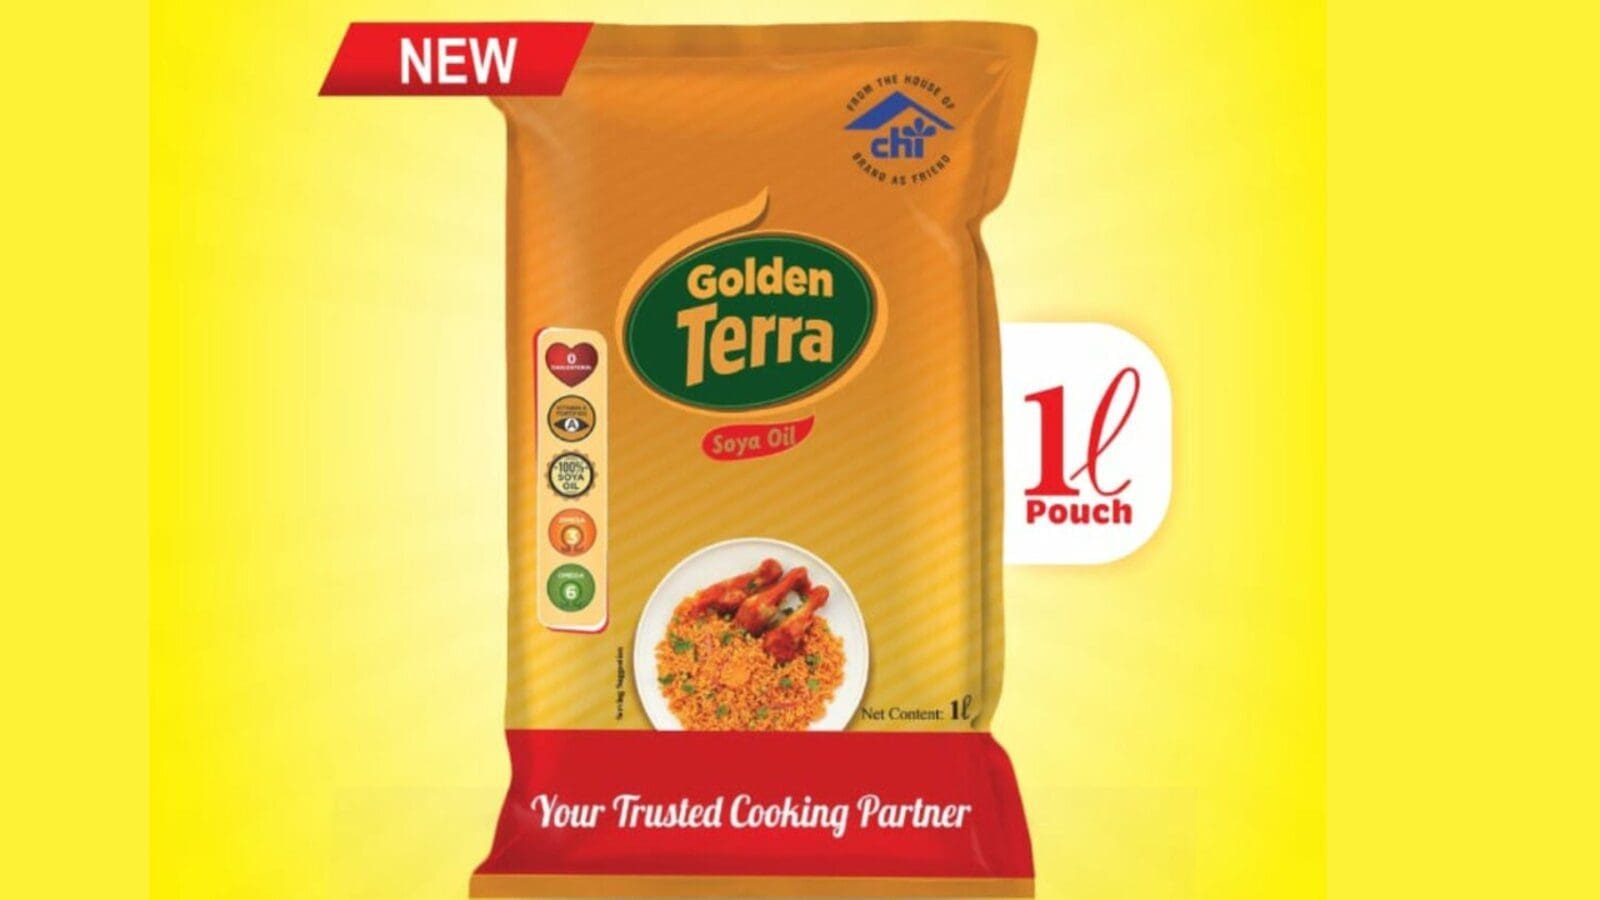 TGI’s newly launched Golden Terra soya oil pack commended by consumers for affordability